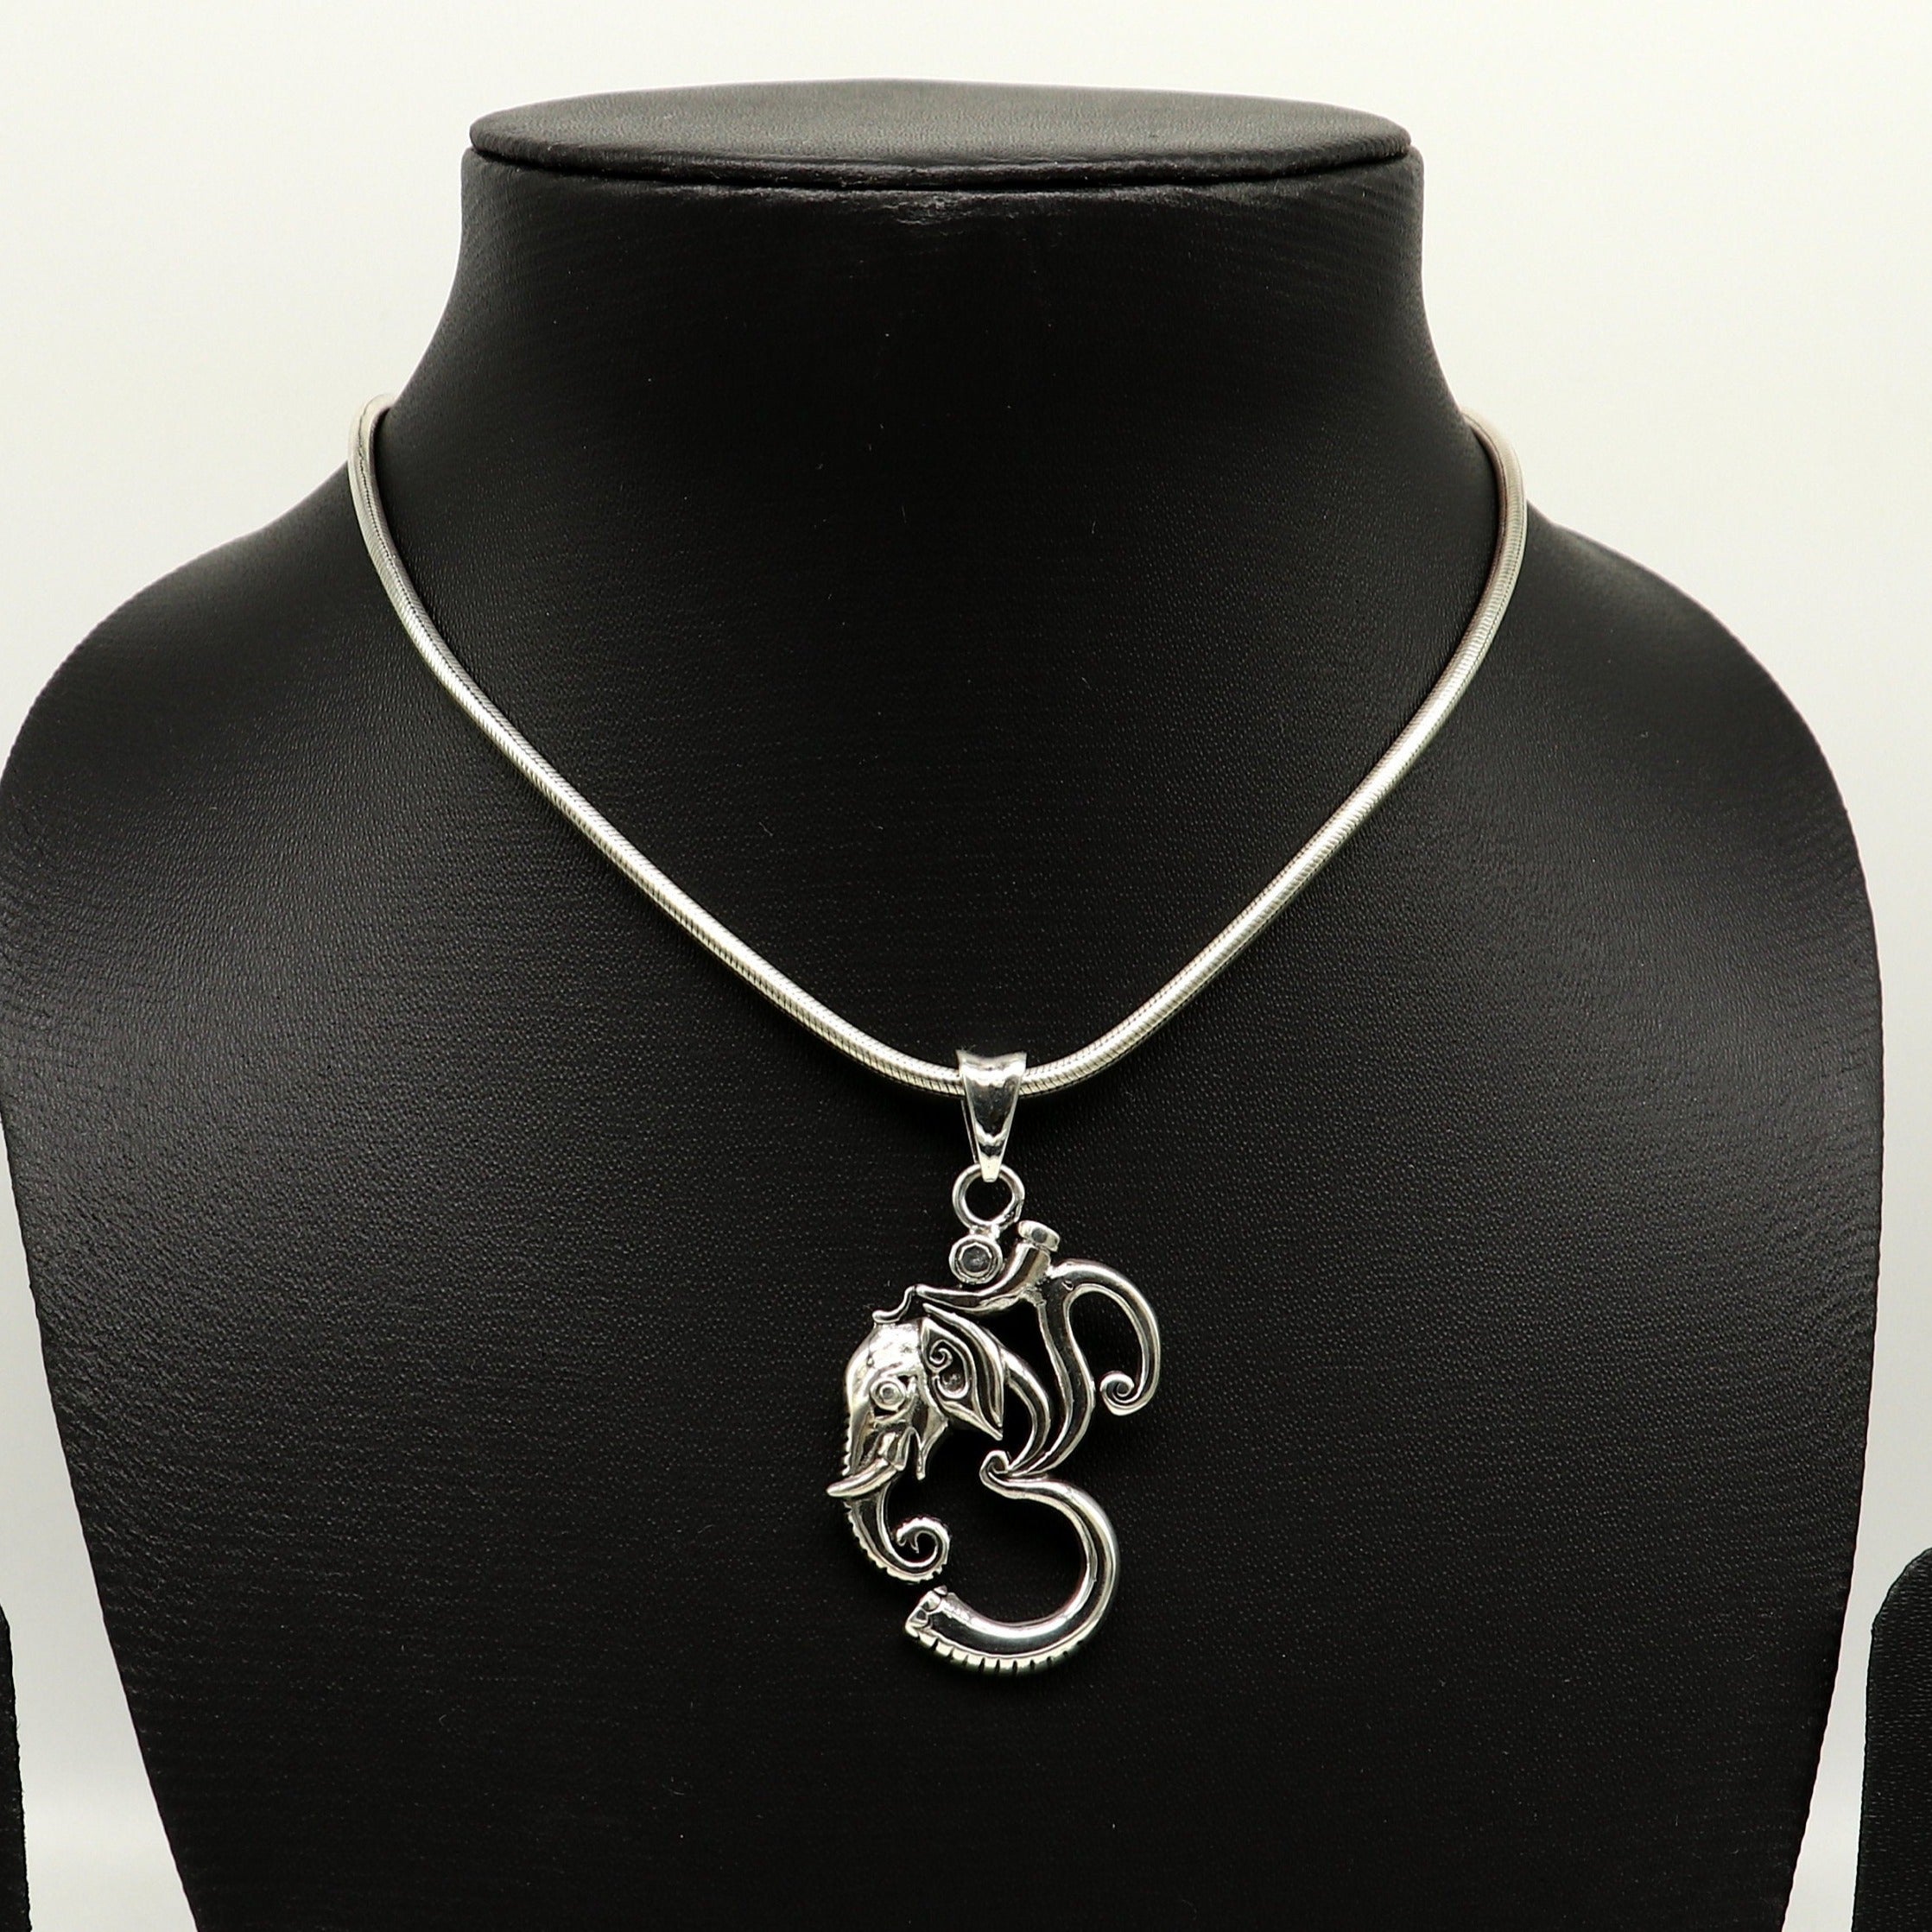 925 Sterling Silver necklace snake chain Snake Chain Necklace 2